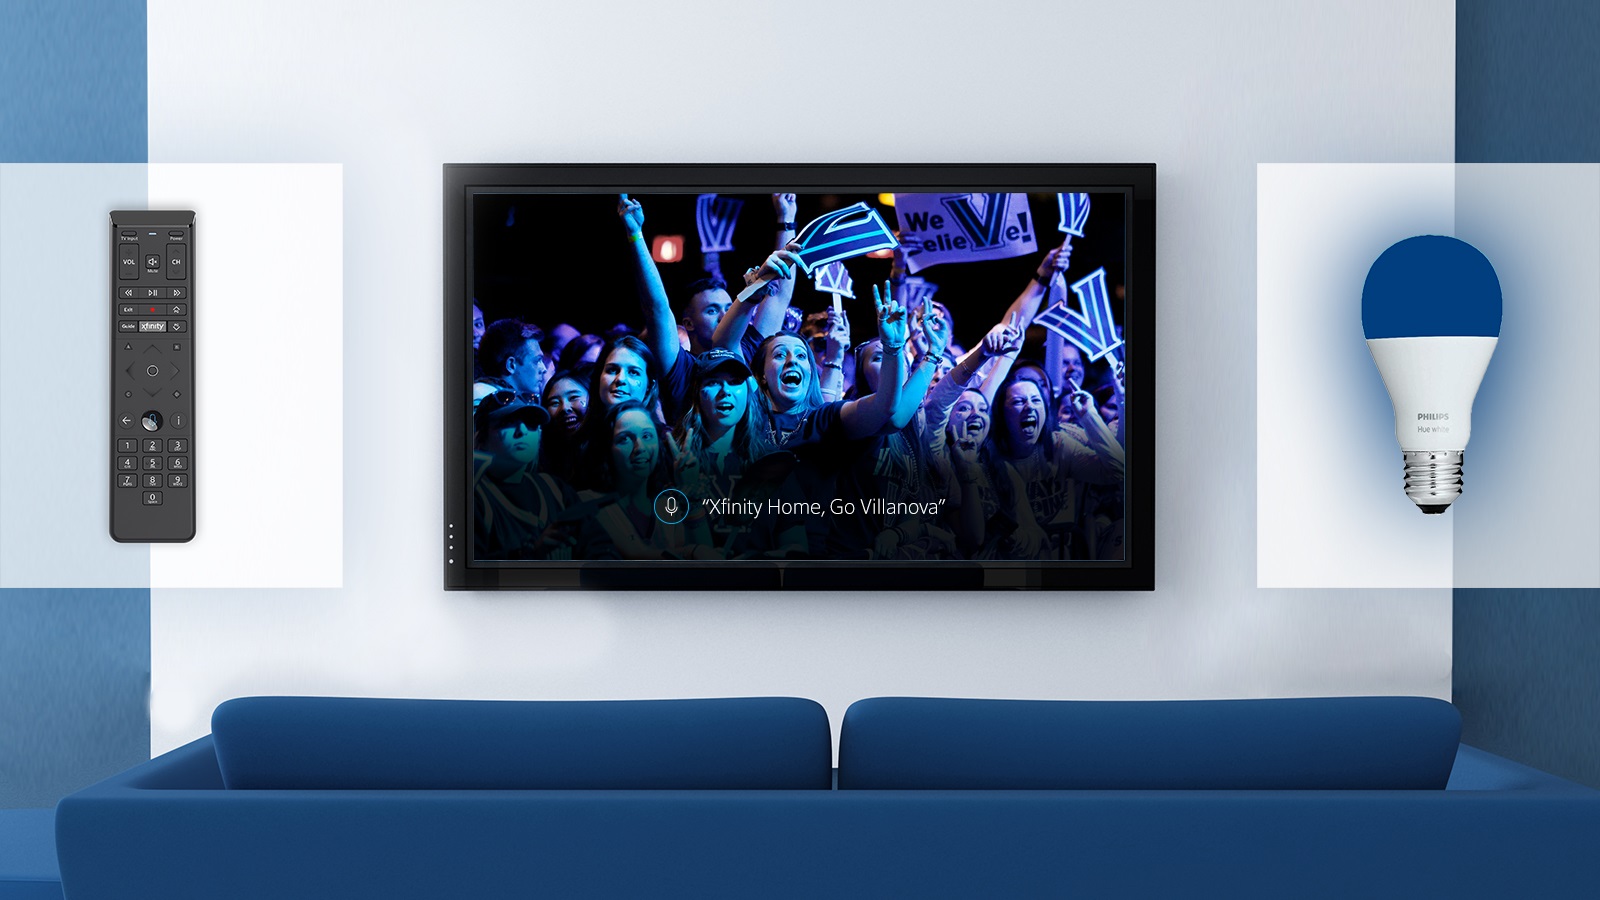 A TV displays an X1 Voice Remote voice command that reads "Xfinity Home, Go Villanova".